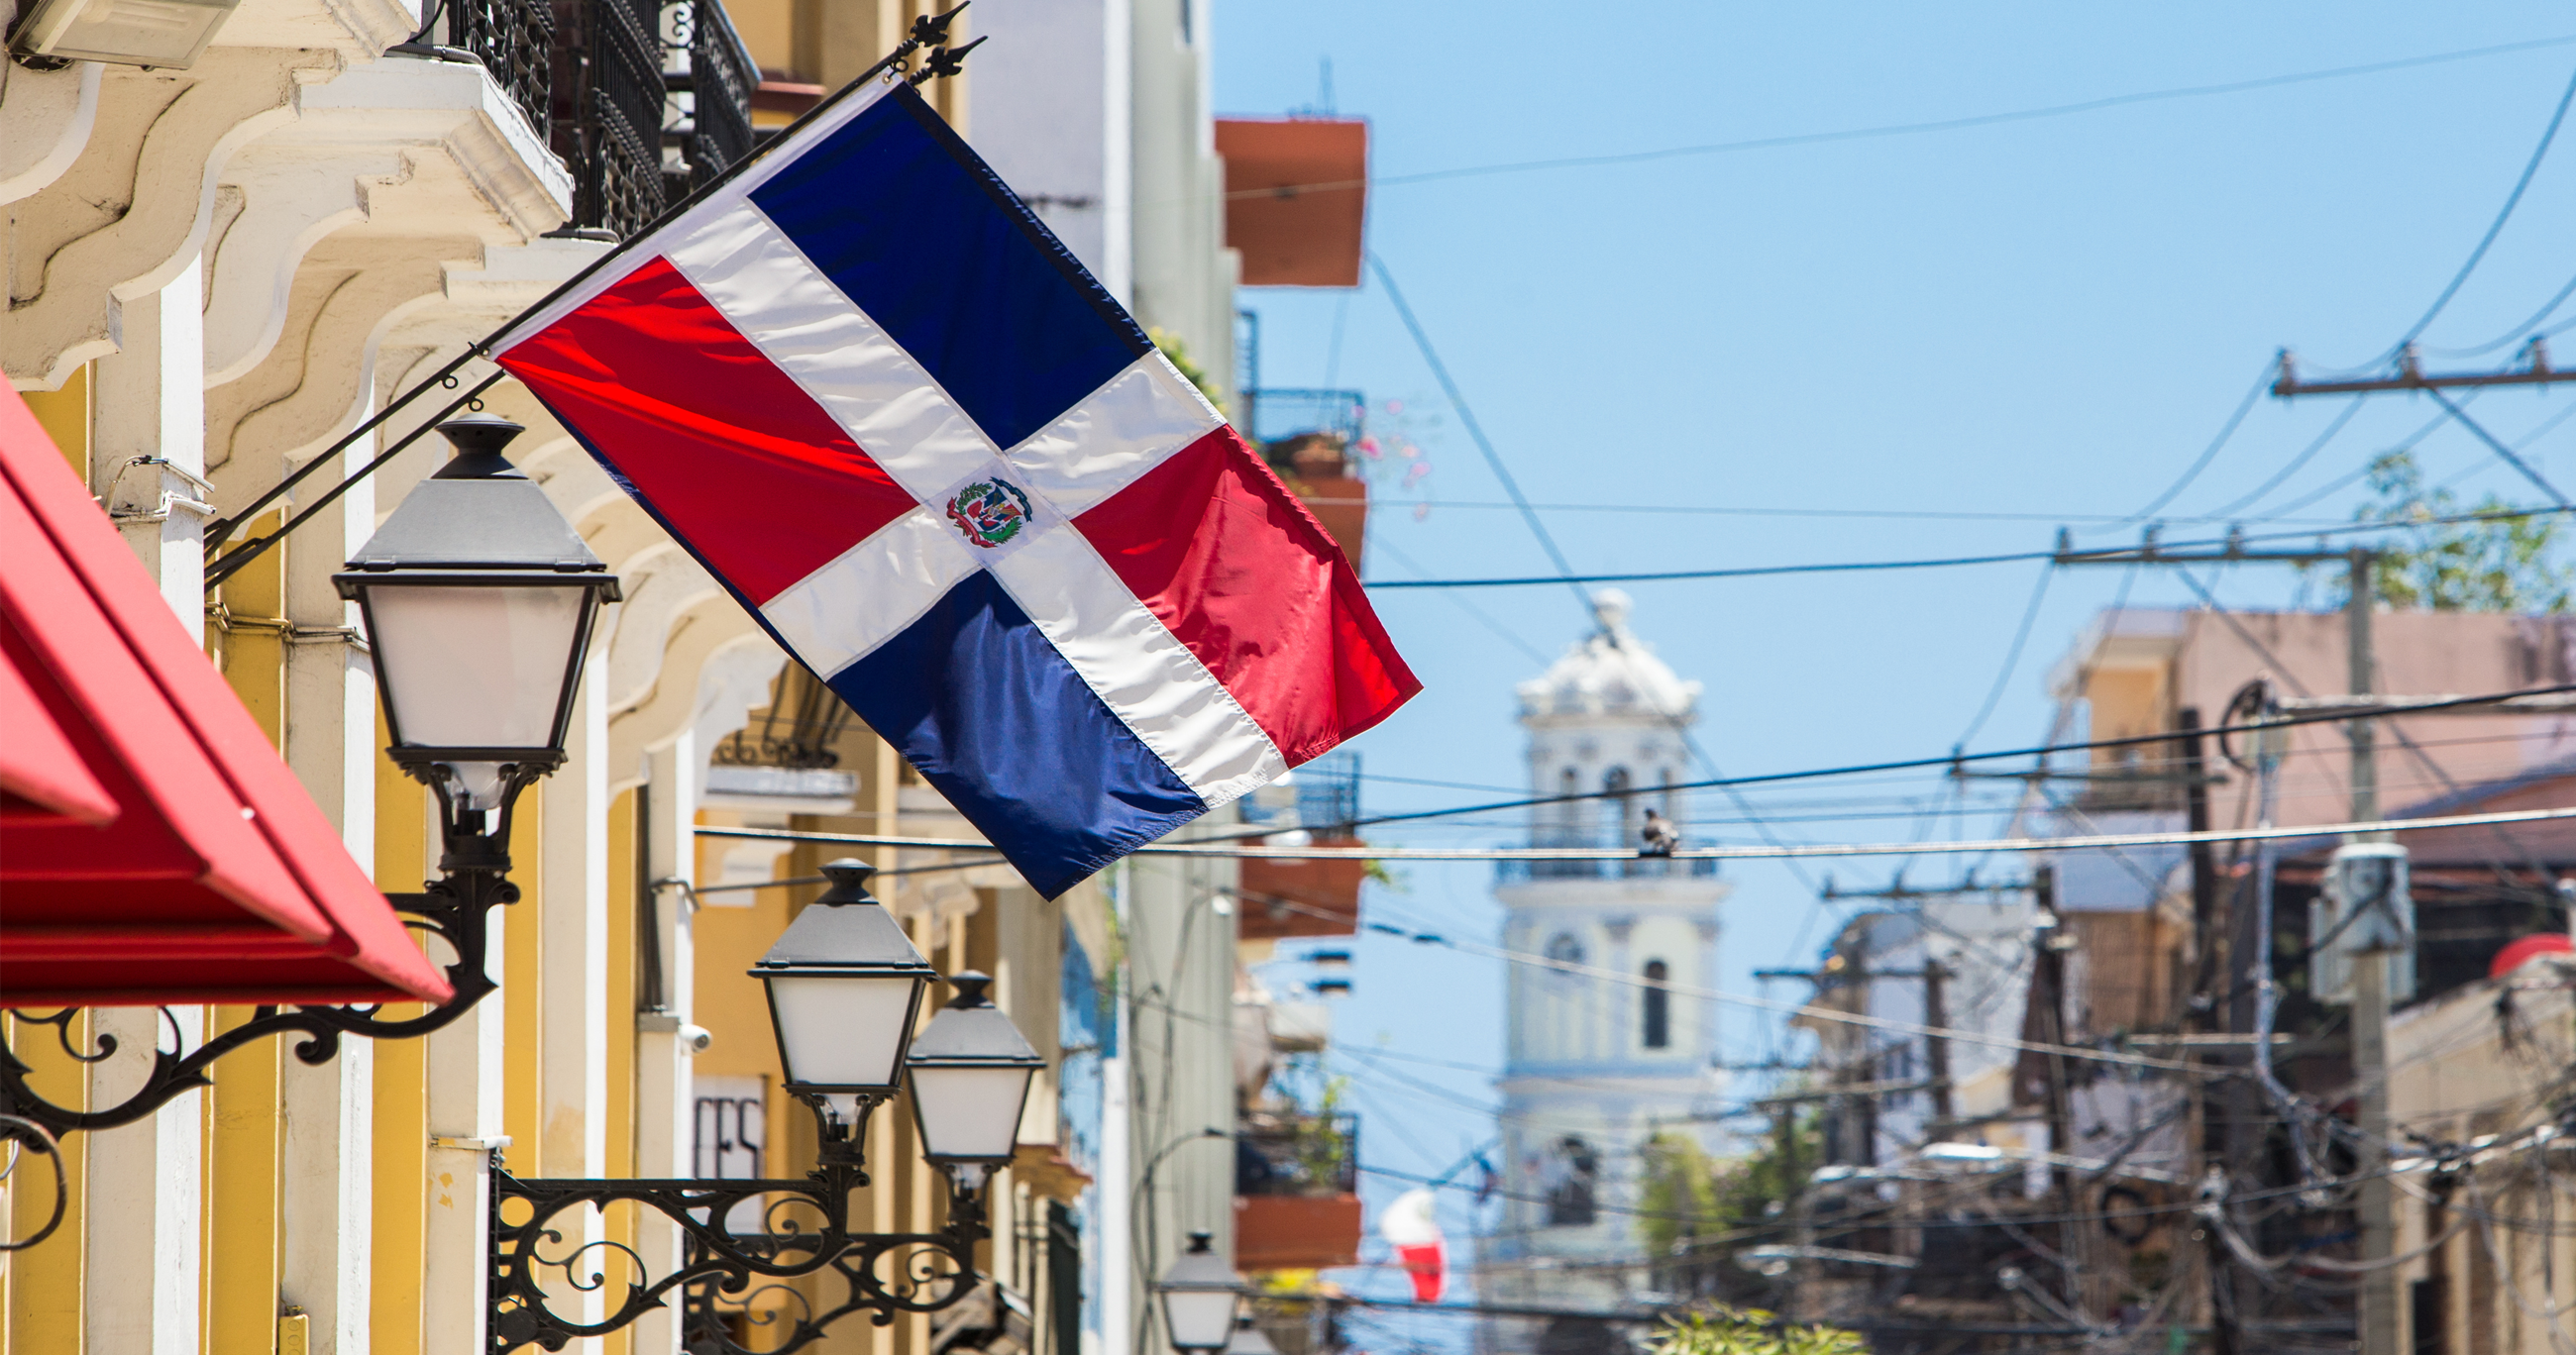 Dominican Republic flag with Santo Domingo in background